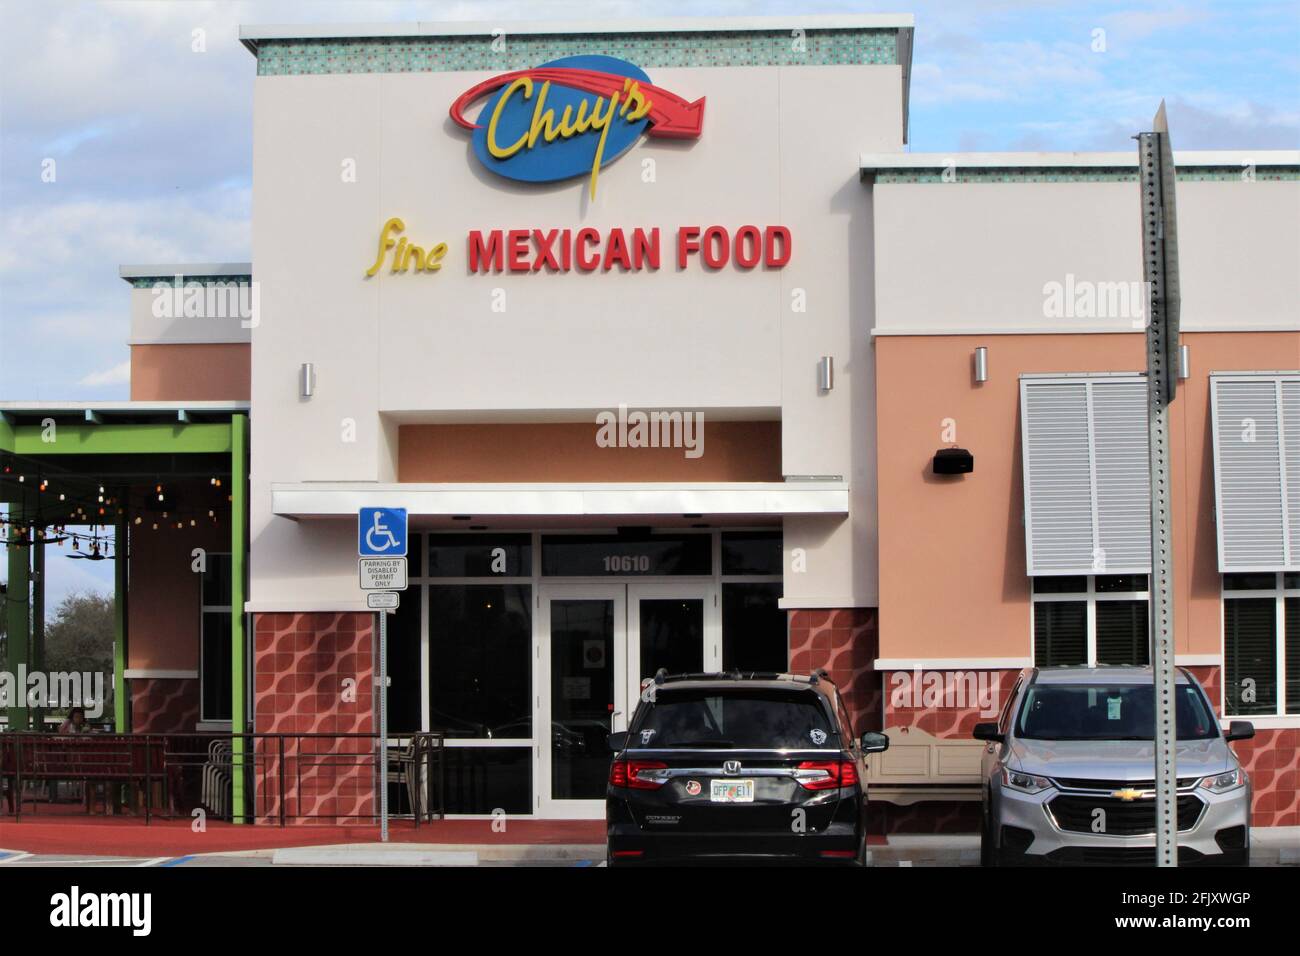 Chuy's is a Tex-Mex restaurant chain established in 1982 in Austin, Texas by Mike Young and John Zapp.  Chuy's serves authentic Tex-Mex food. Stock Photo